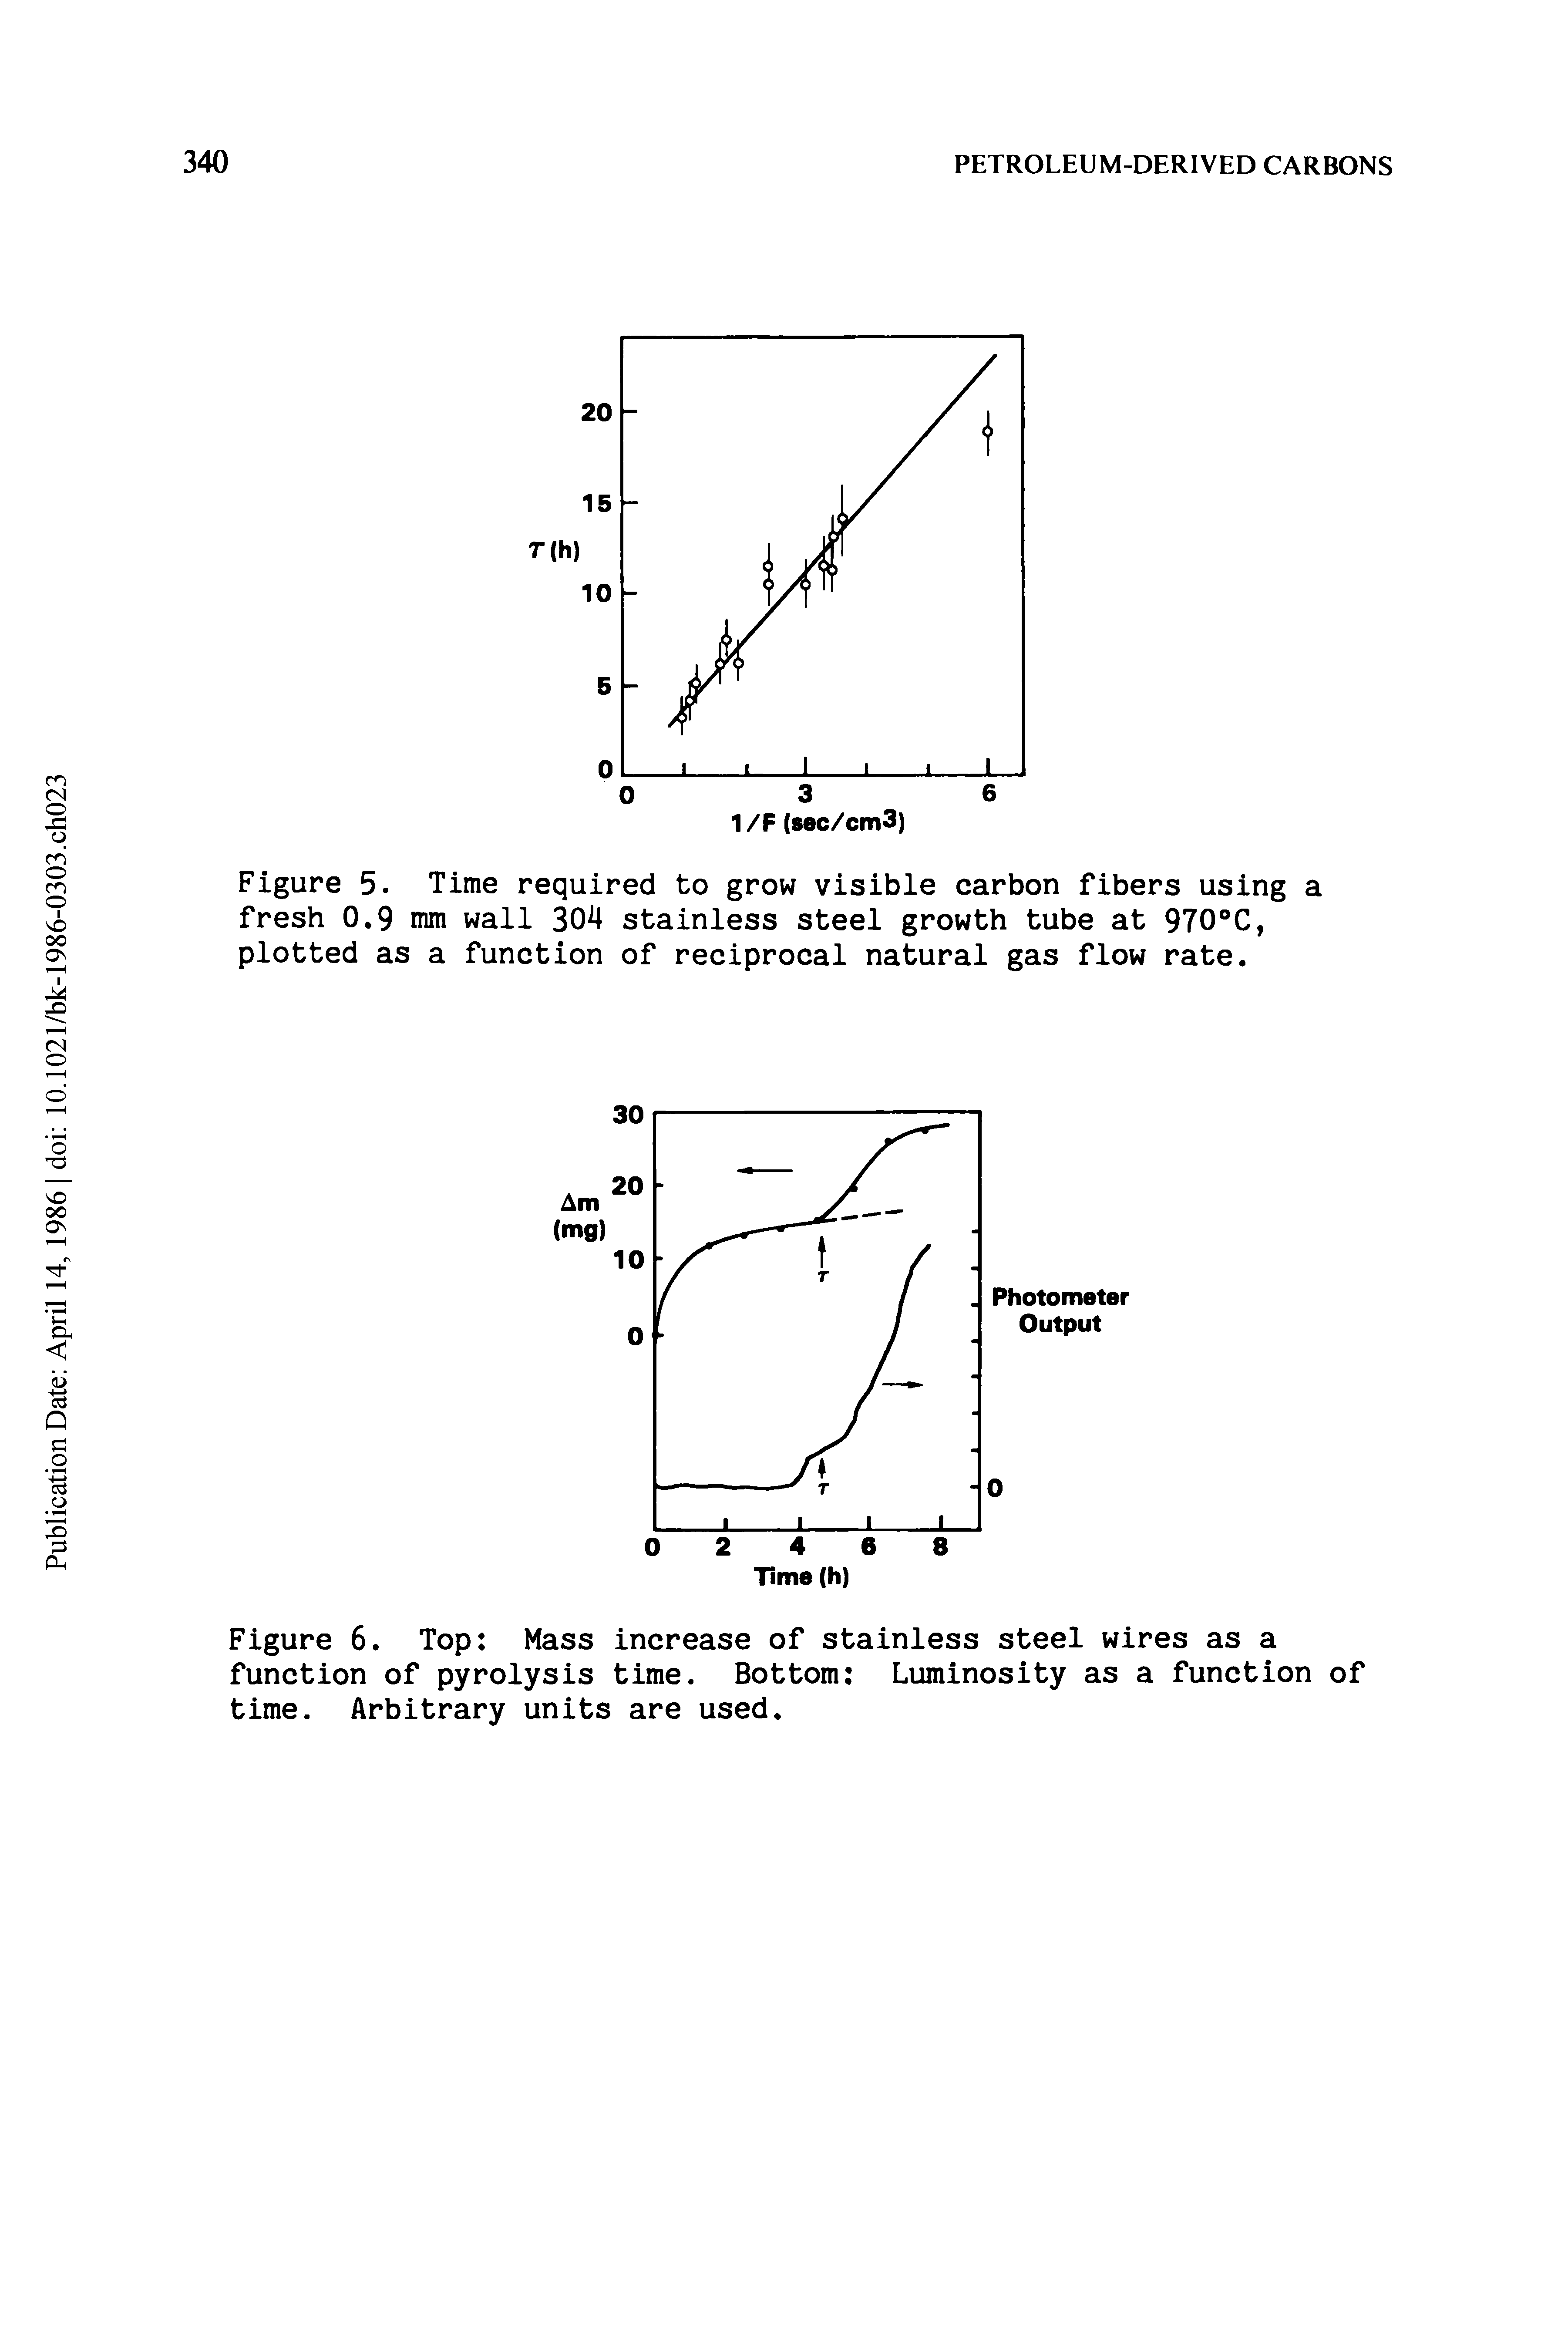 Figure 6. Top Mass increase of stainless steel wires as a function of pyrolysis time. Bottom Luminosity as a function of time. Arbitrary units are used.